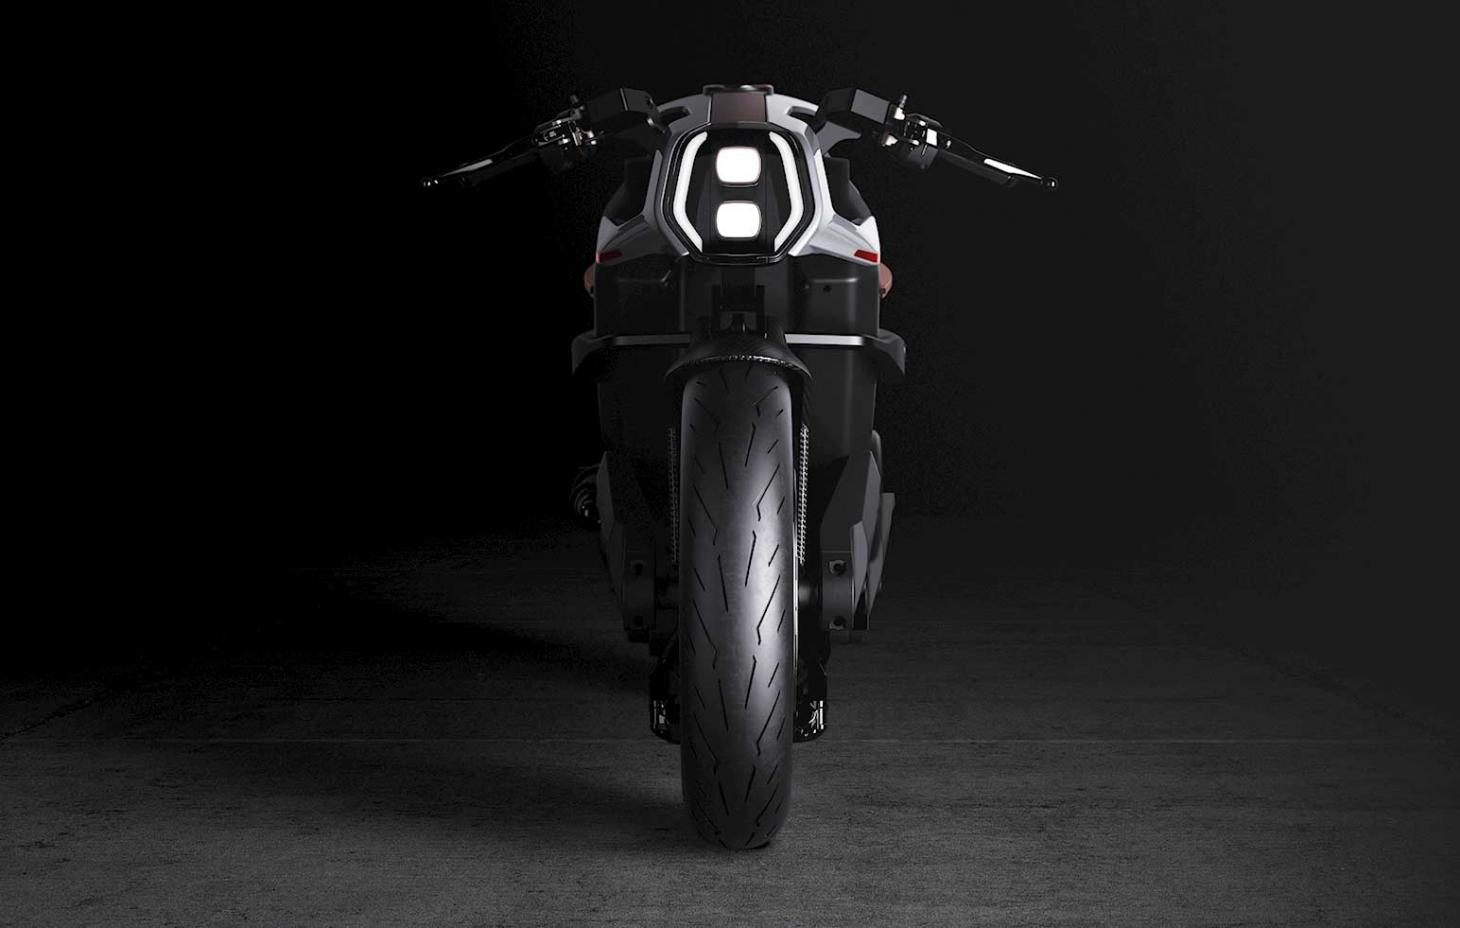 Five pioneering electric motorcycle at EICMA 2018 in Milan